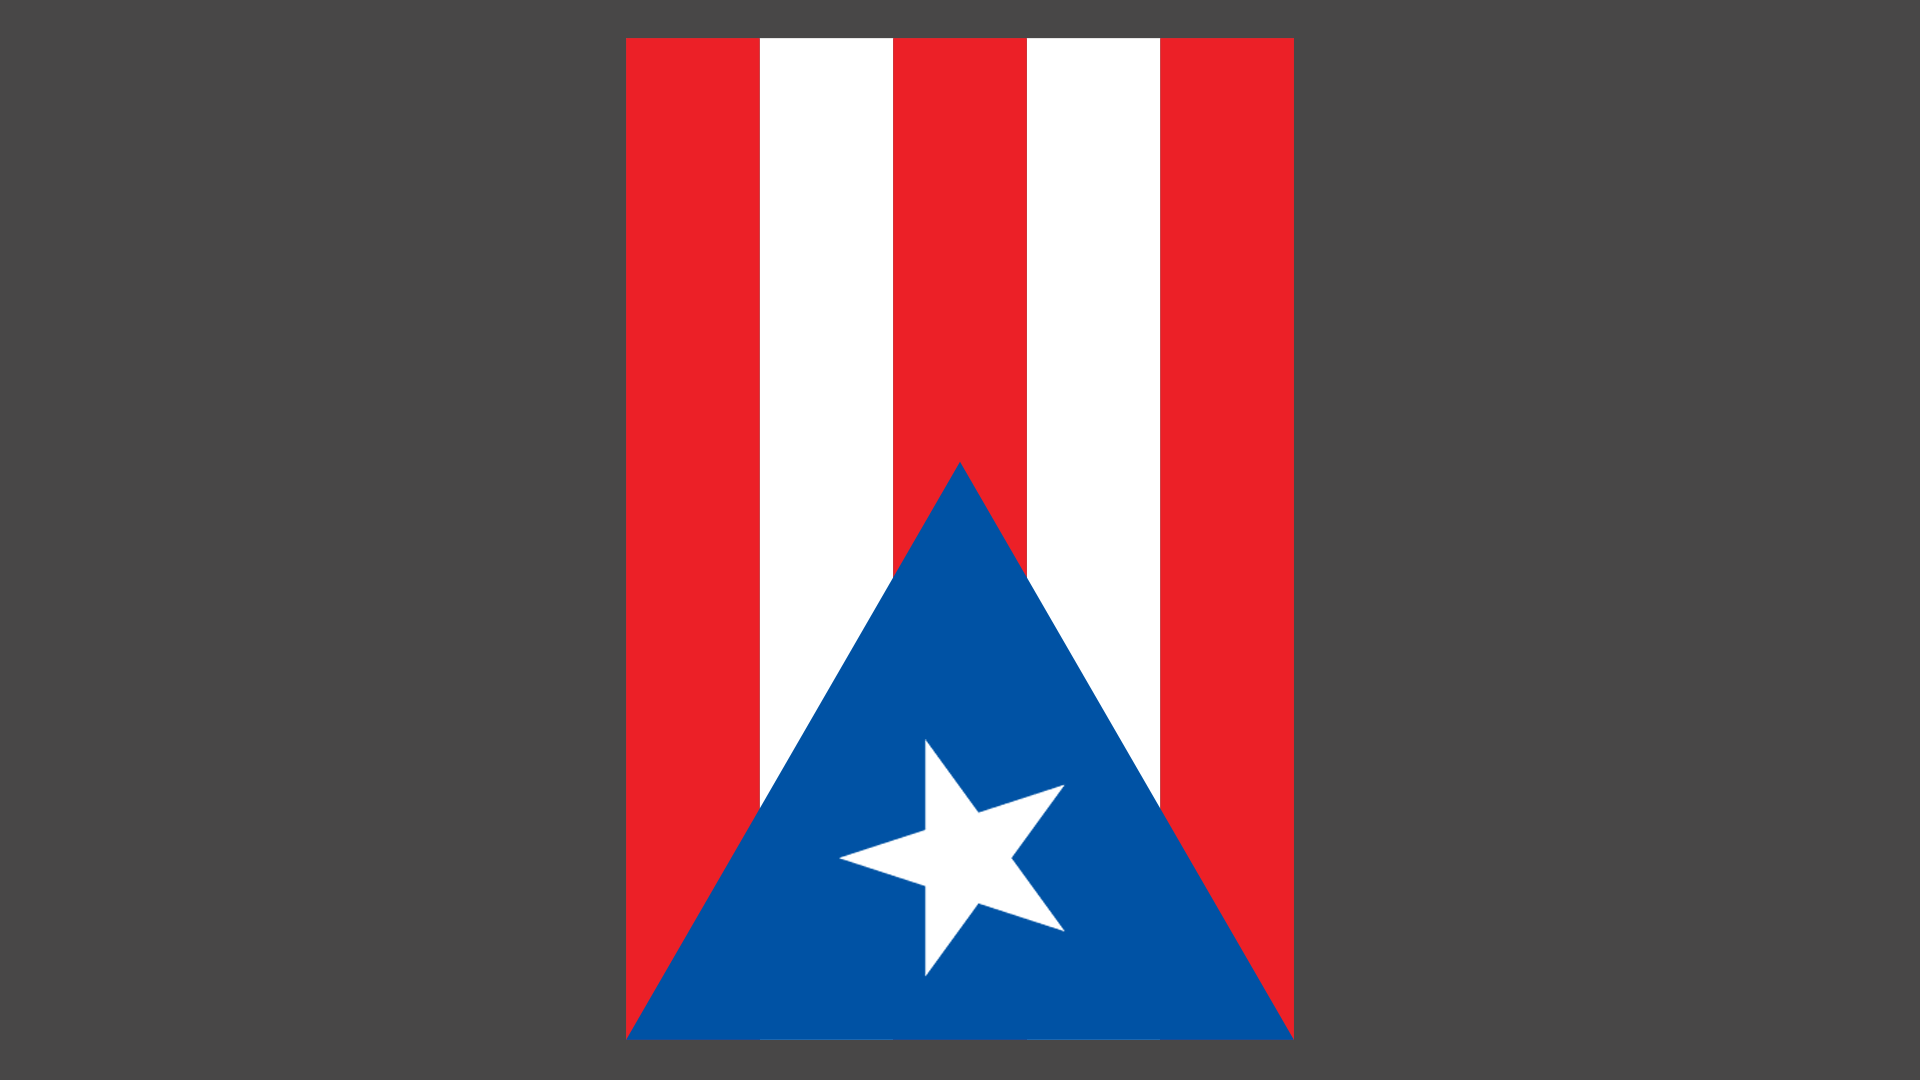 Illustration of the Puerto Rican flag falling apart to leave an exclamation point